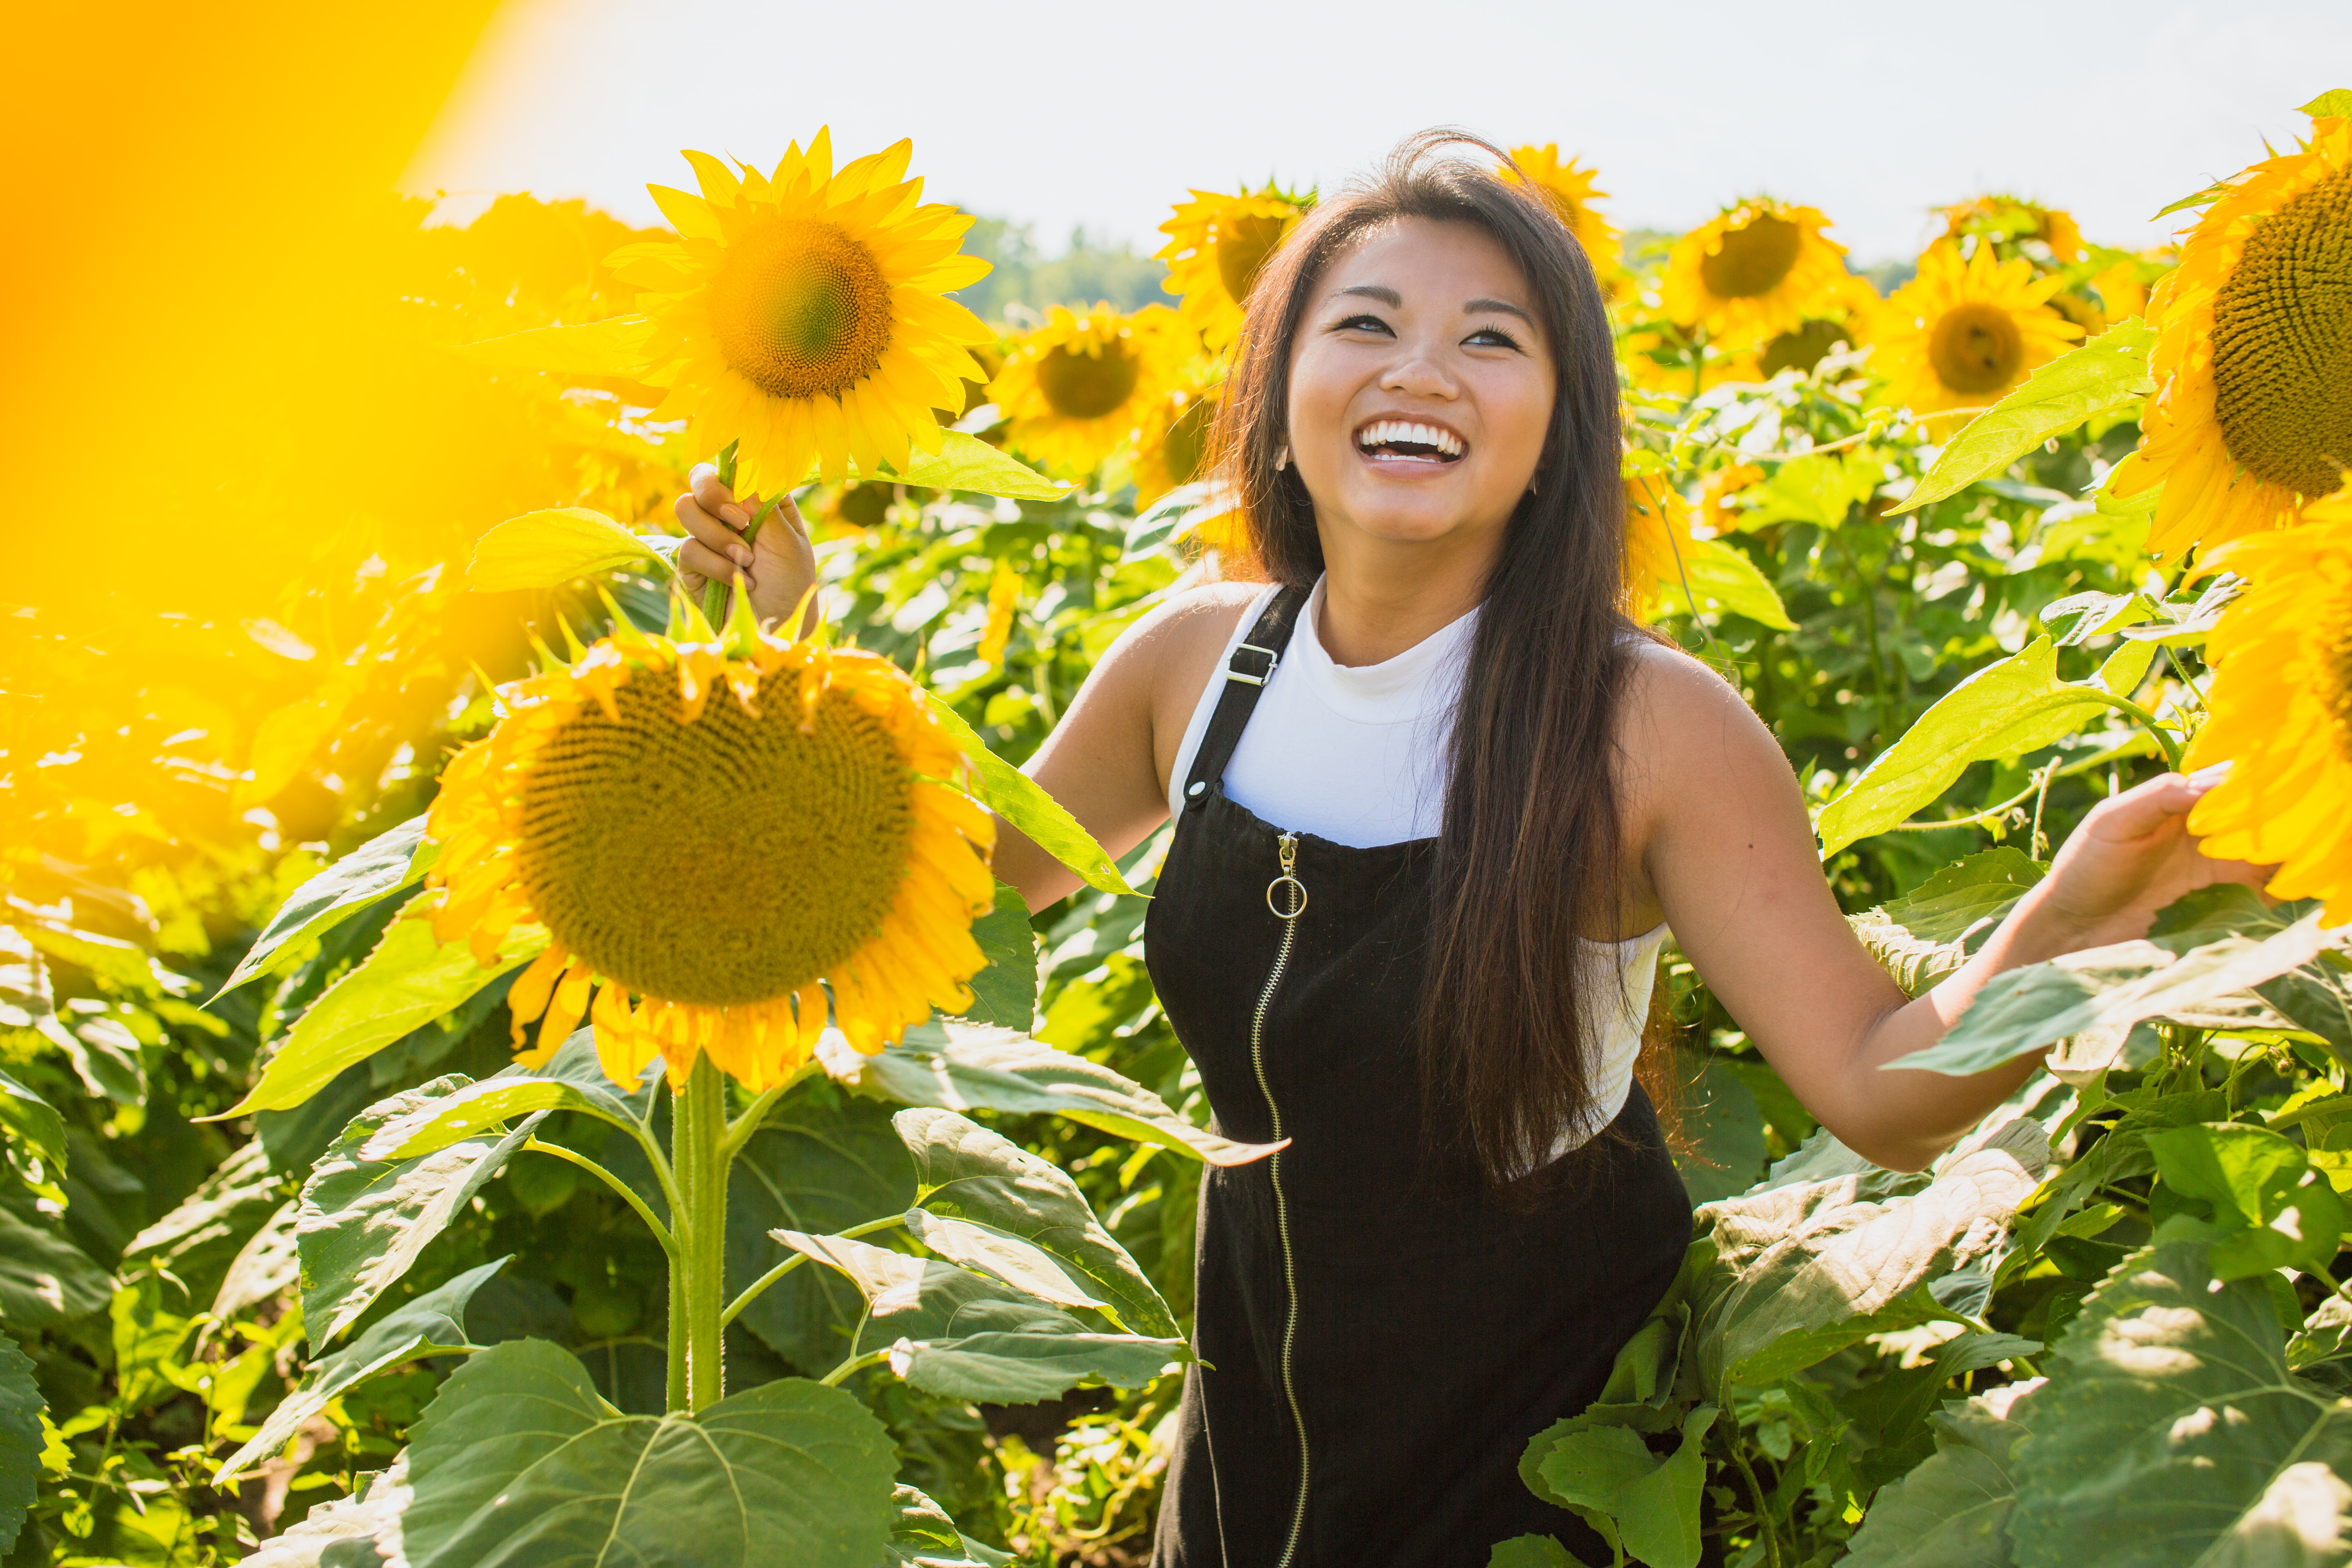 Smiling Woman in a Field of Sunflowers